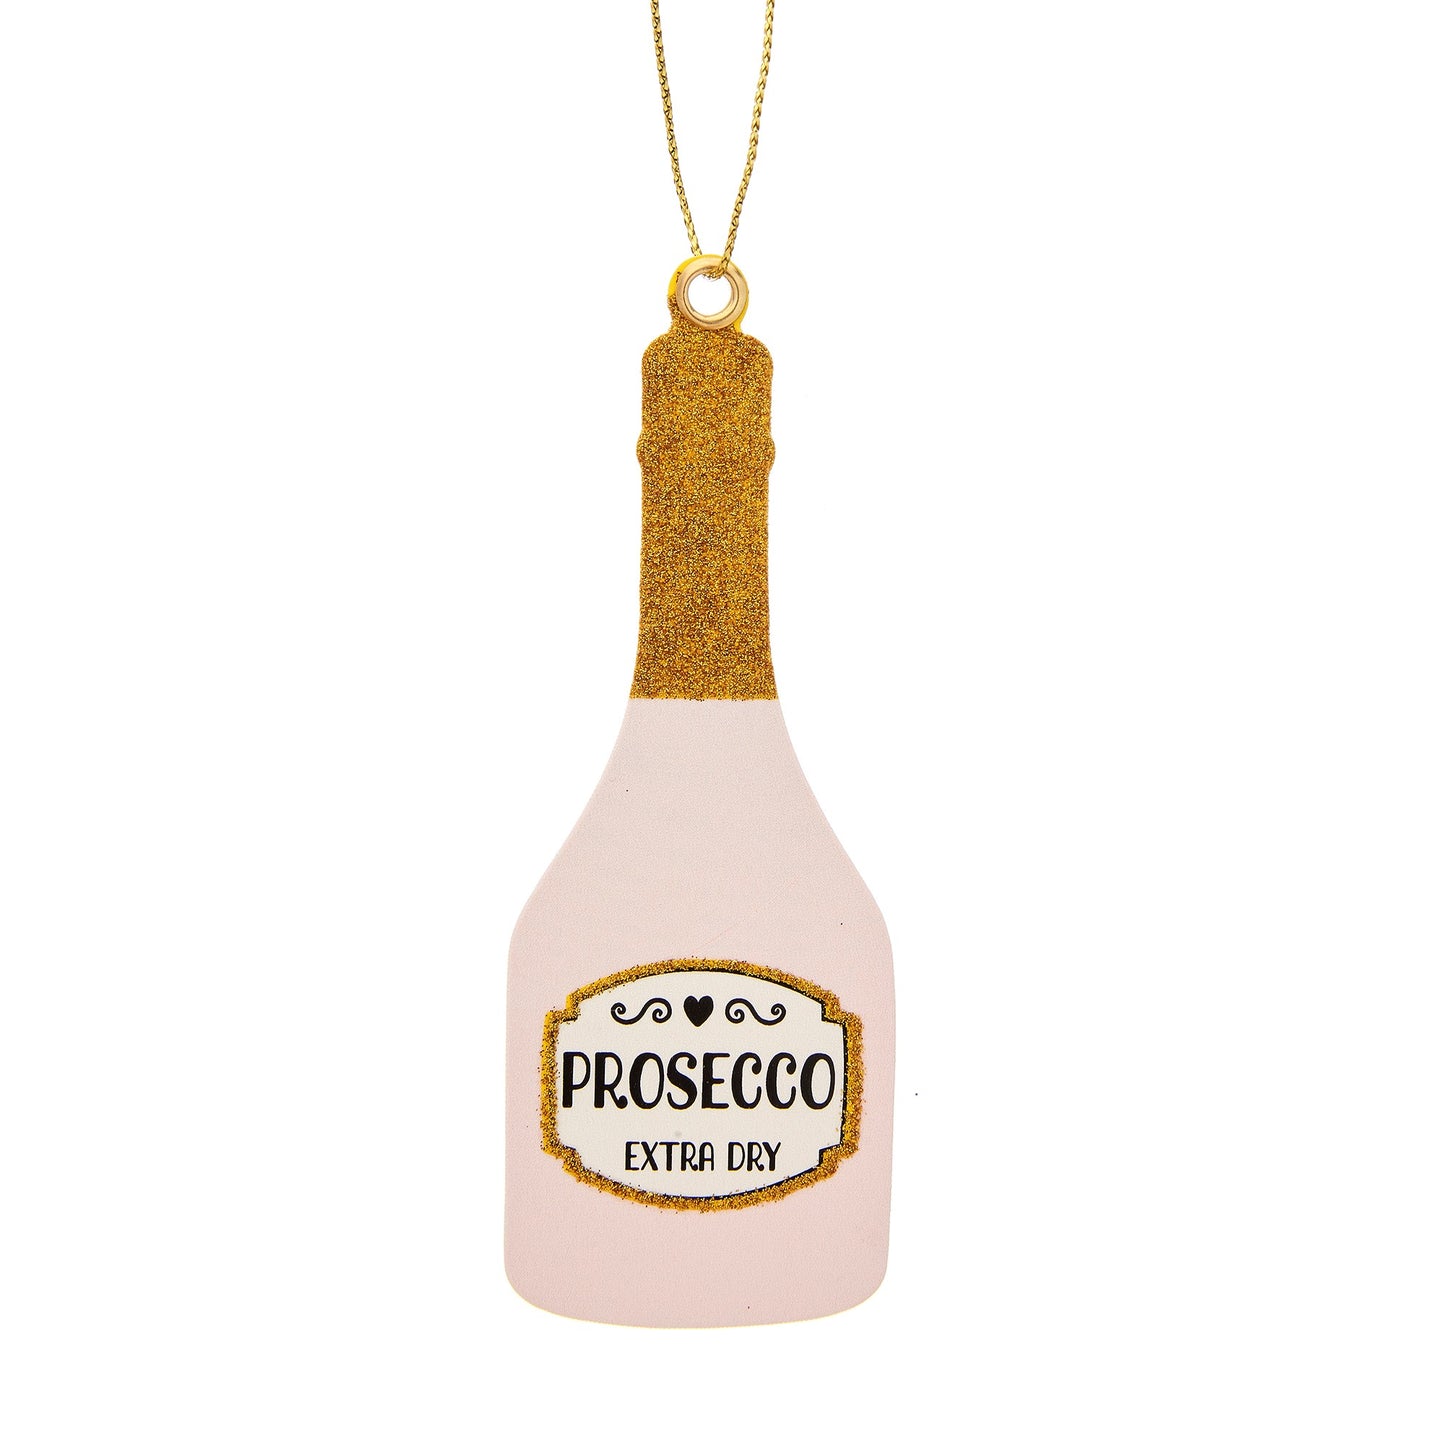 Kick start the party this year with these fun pink prosecco bottle design gift tags!